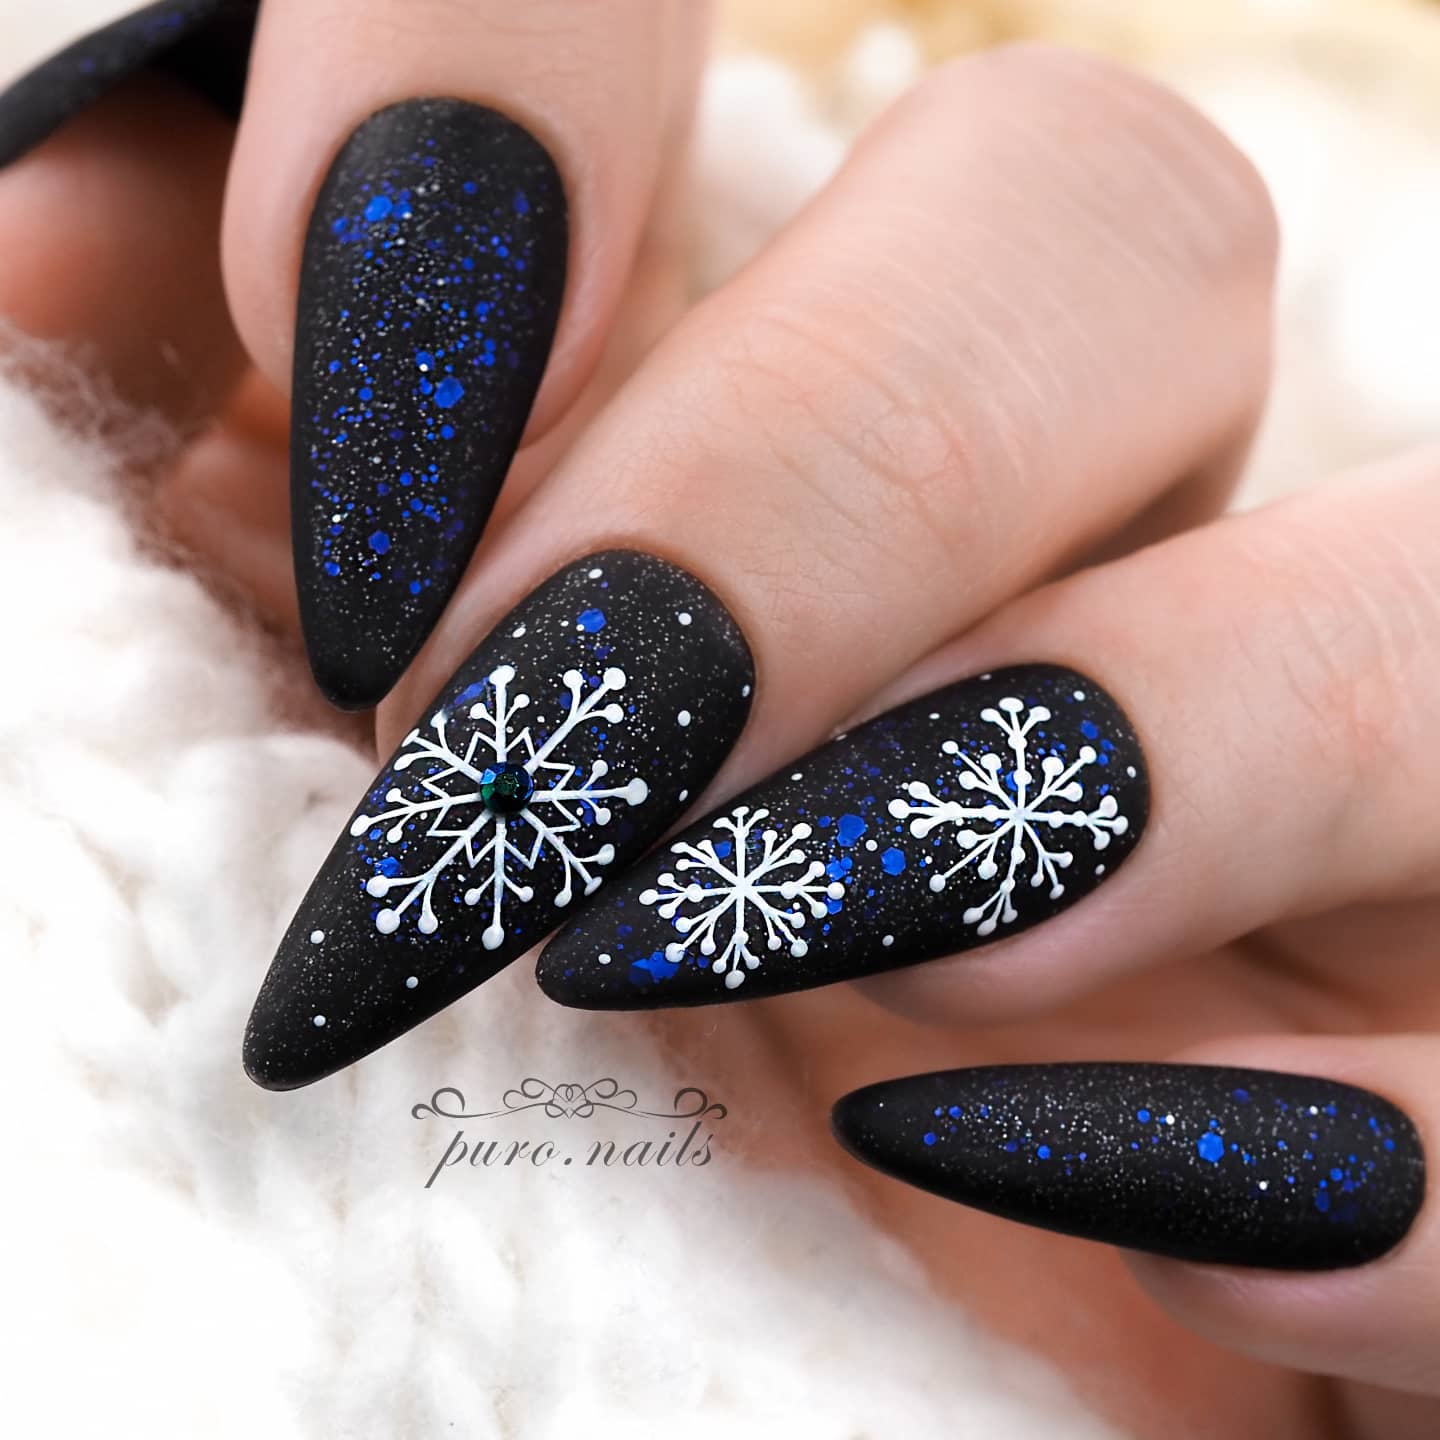 Black Nails with Blue Glitter and Snowflakes